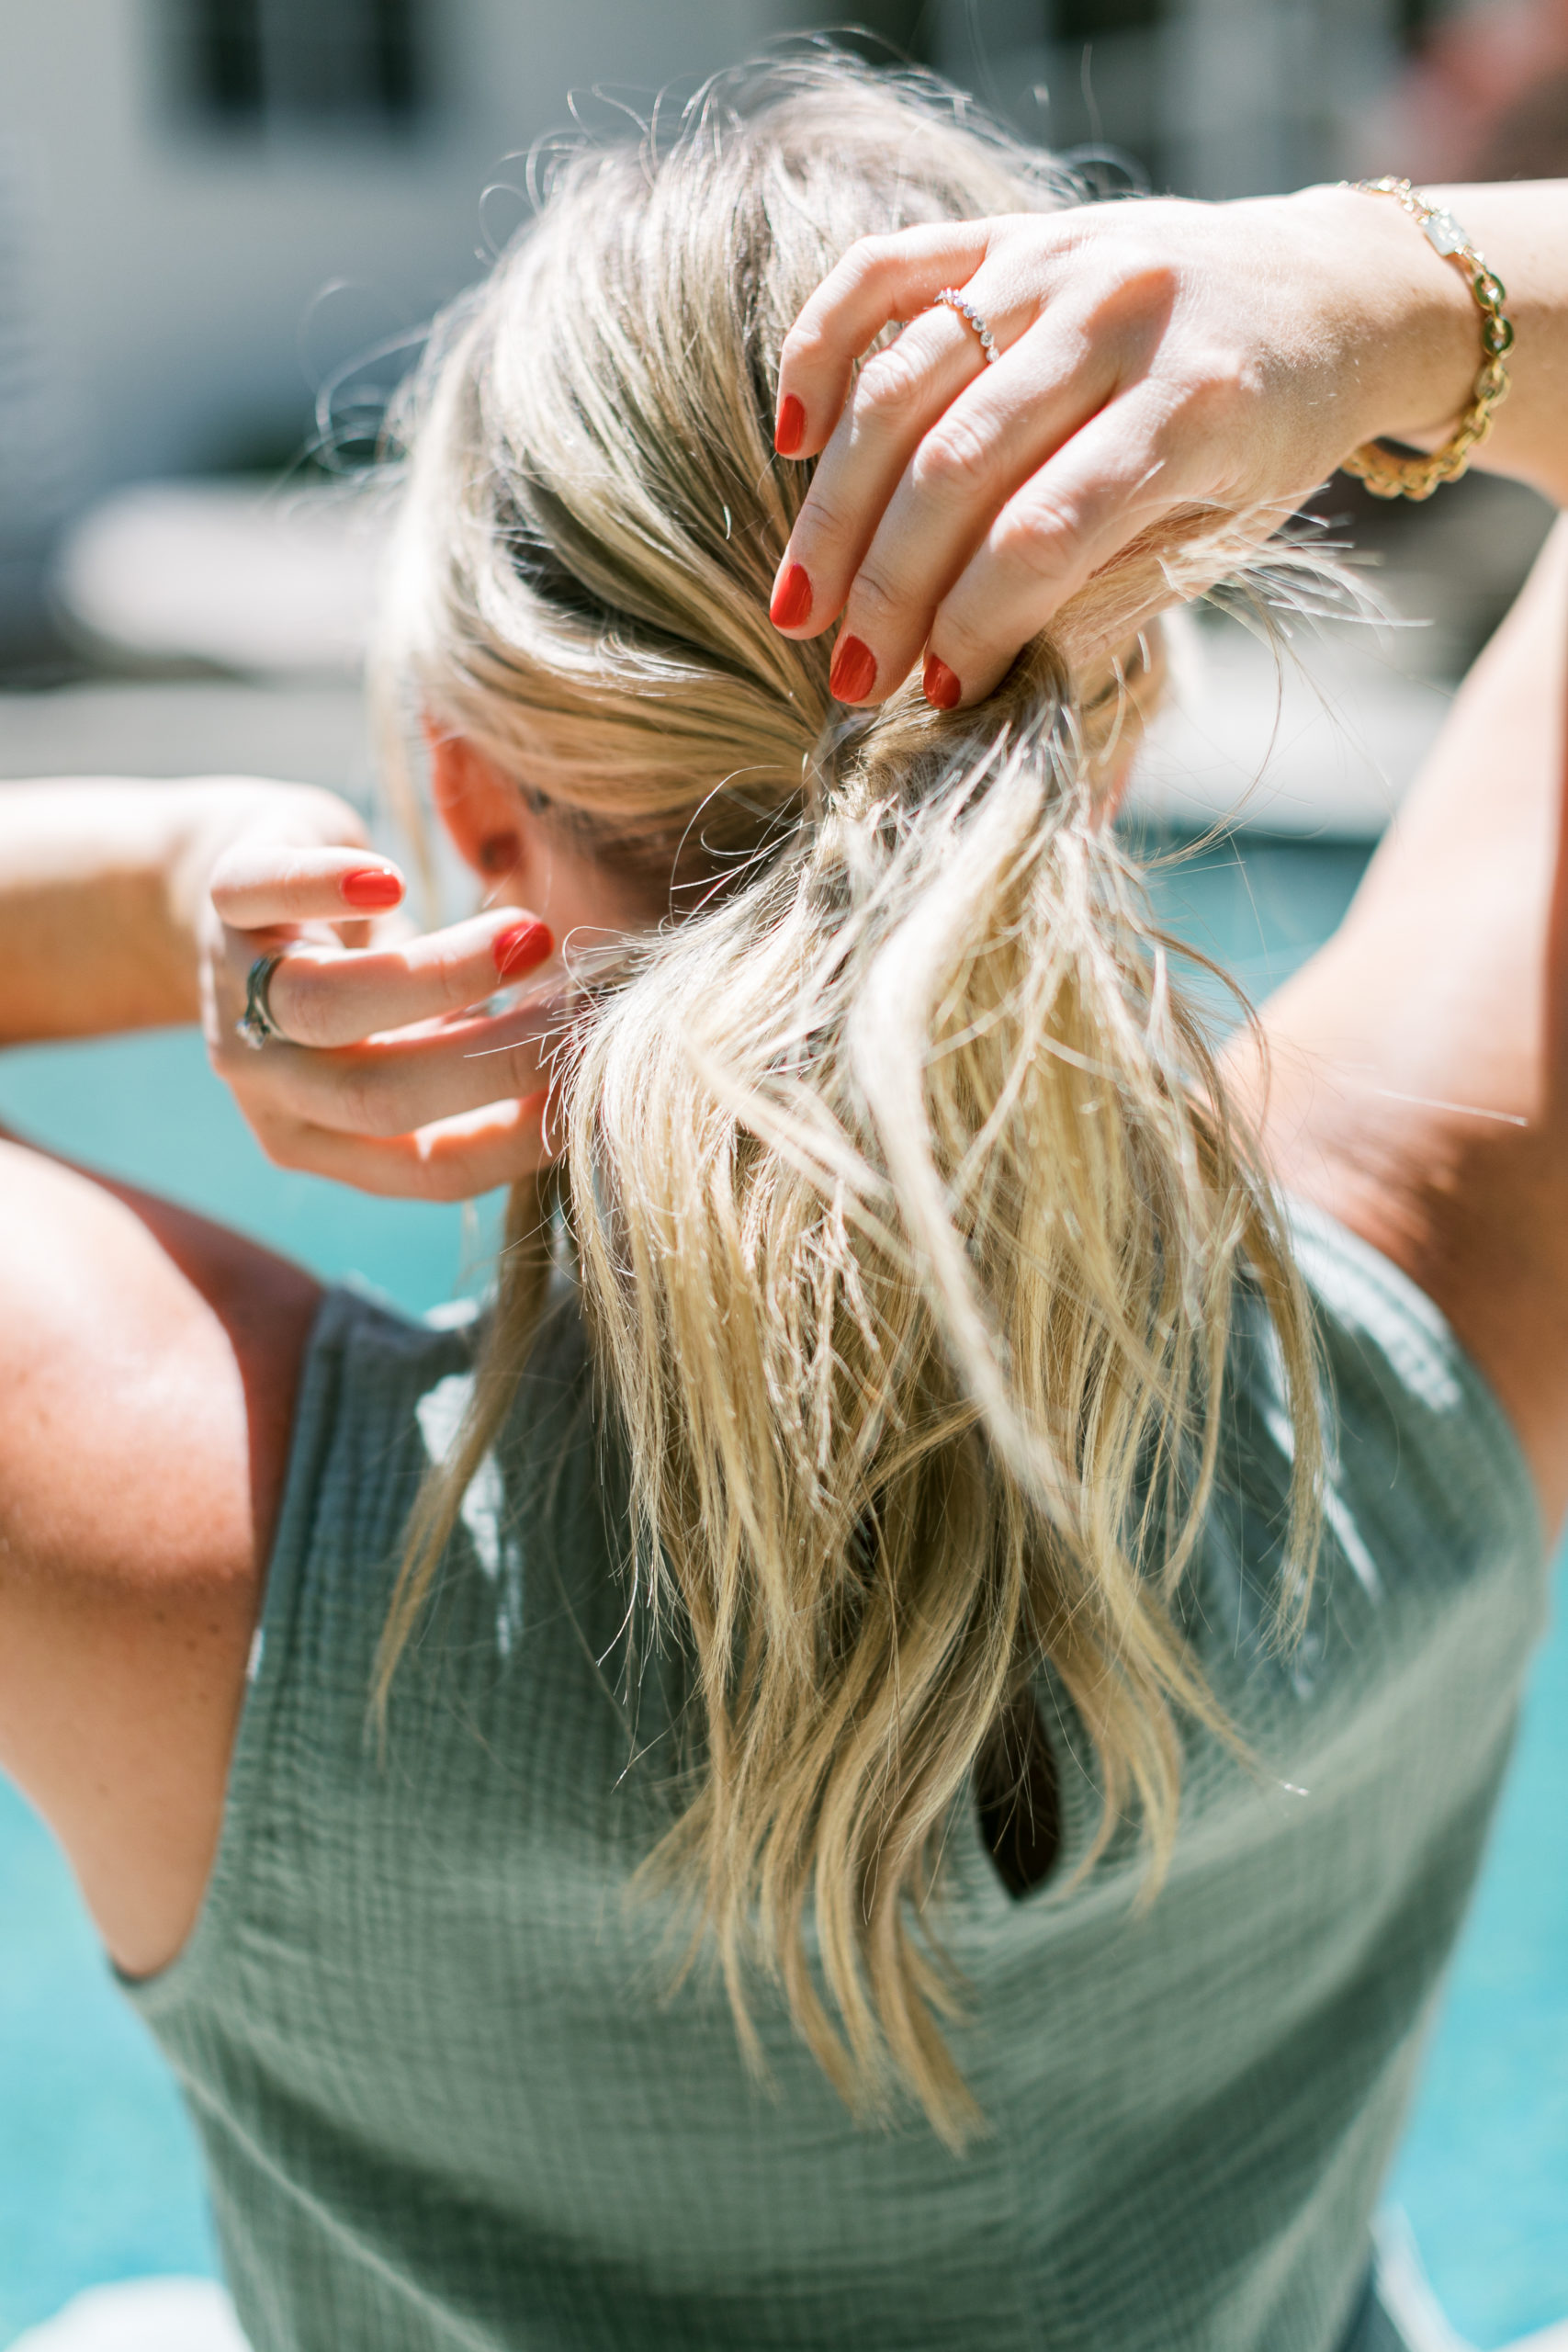 Summer Hair Care Dos and Don'ts! – The Small Things Blog